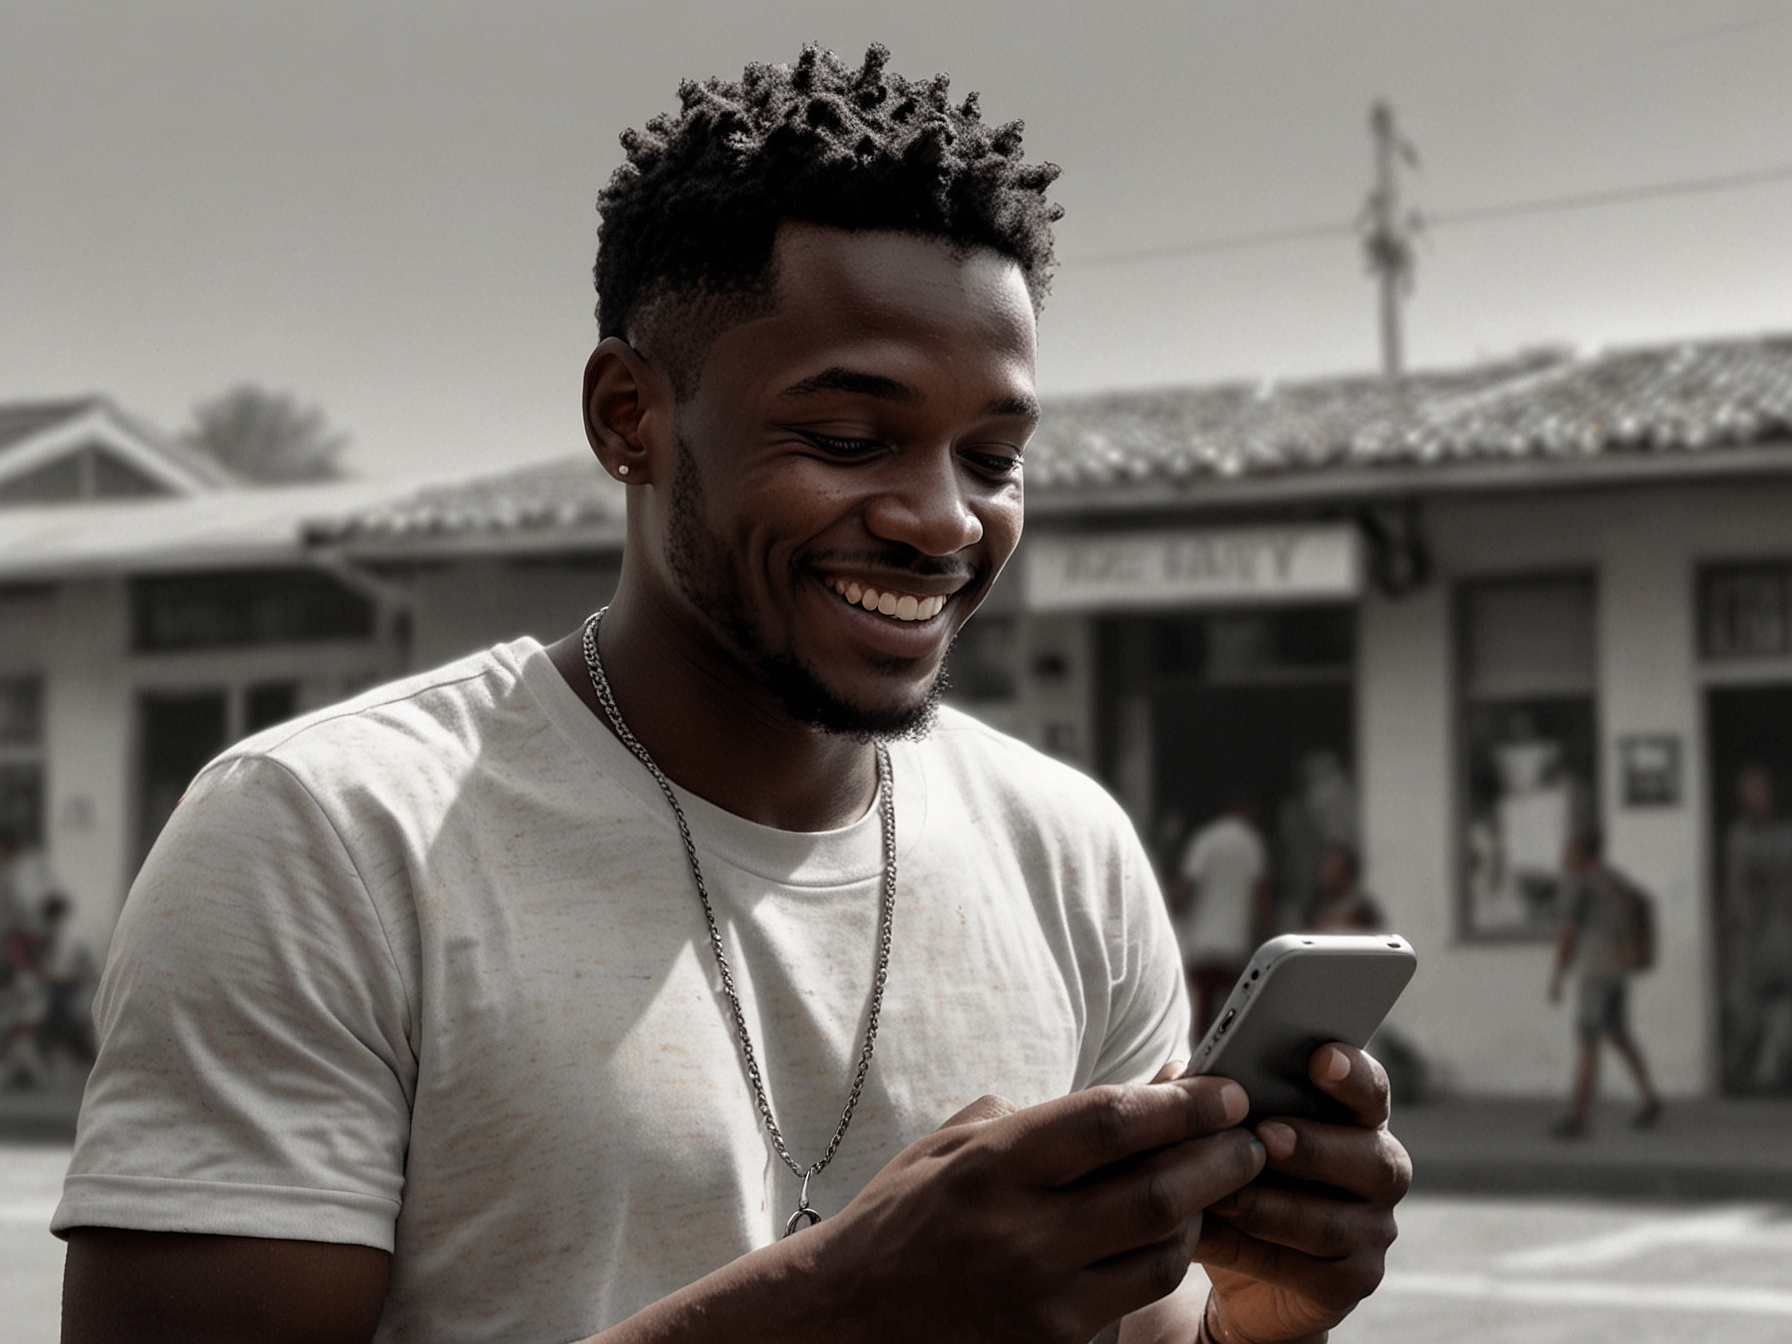 Jude Lartey captures a candid moment of joy using his smartphone camera, highlighting his approach of finding beauty in everyday life and showcasing the power of simplicity in visual storytelling.